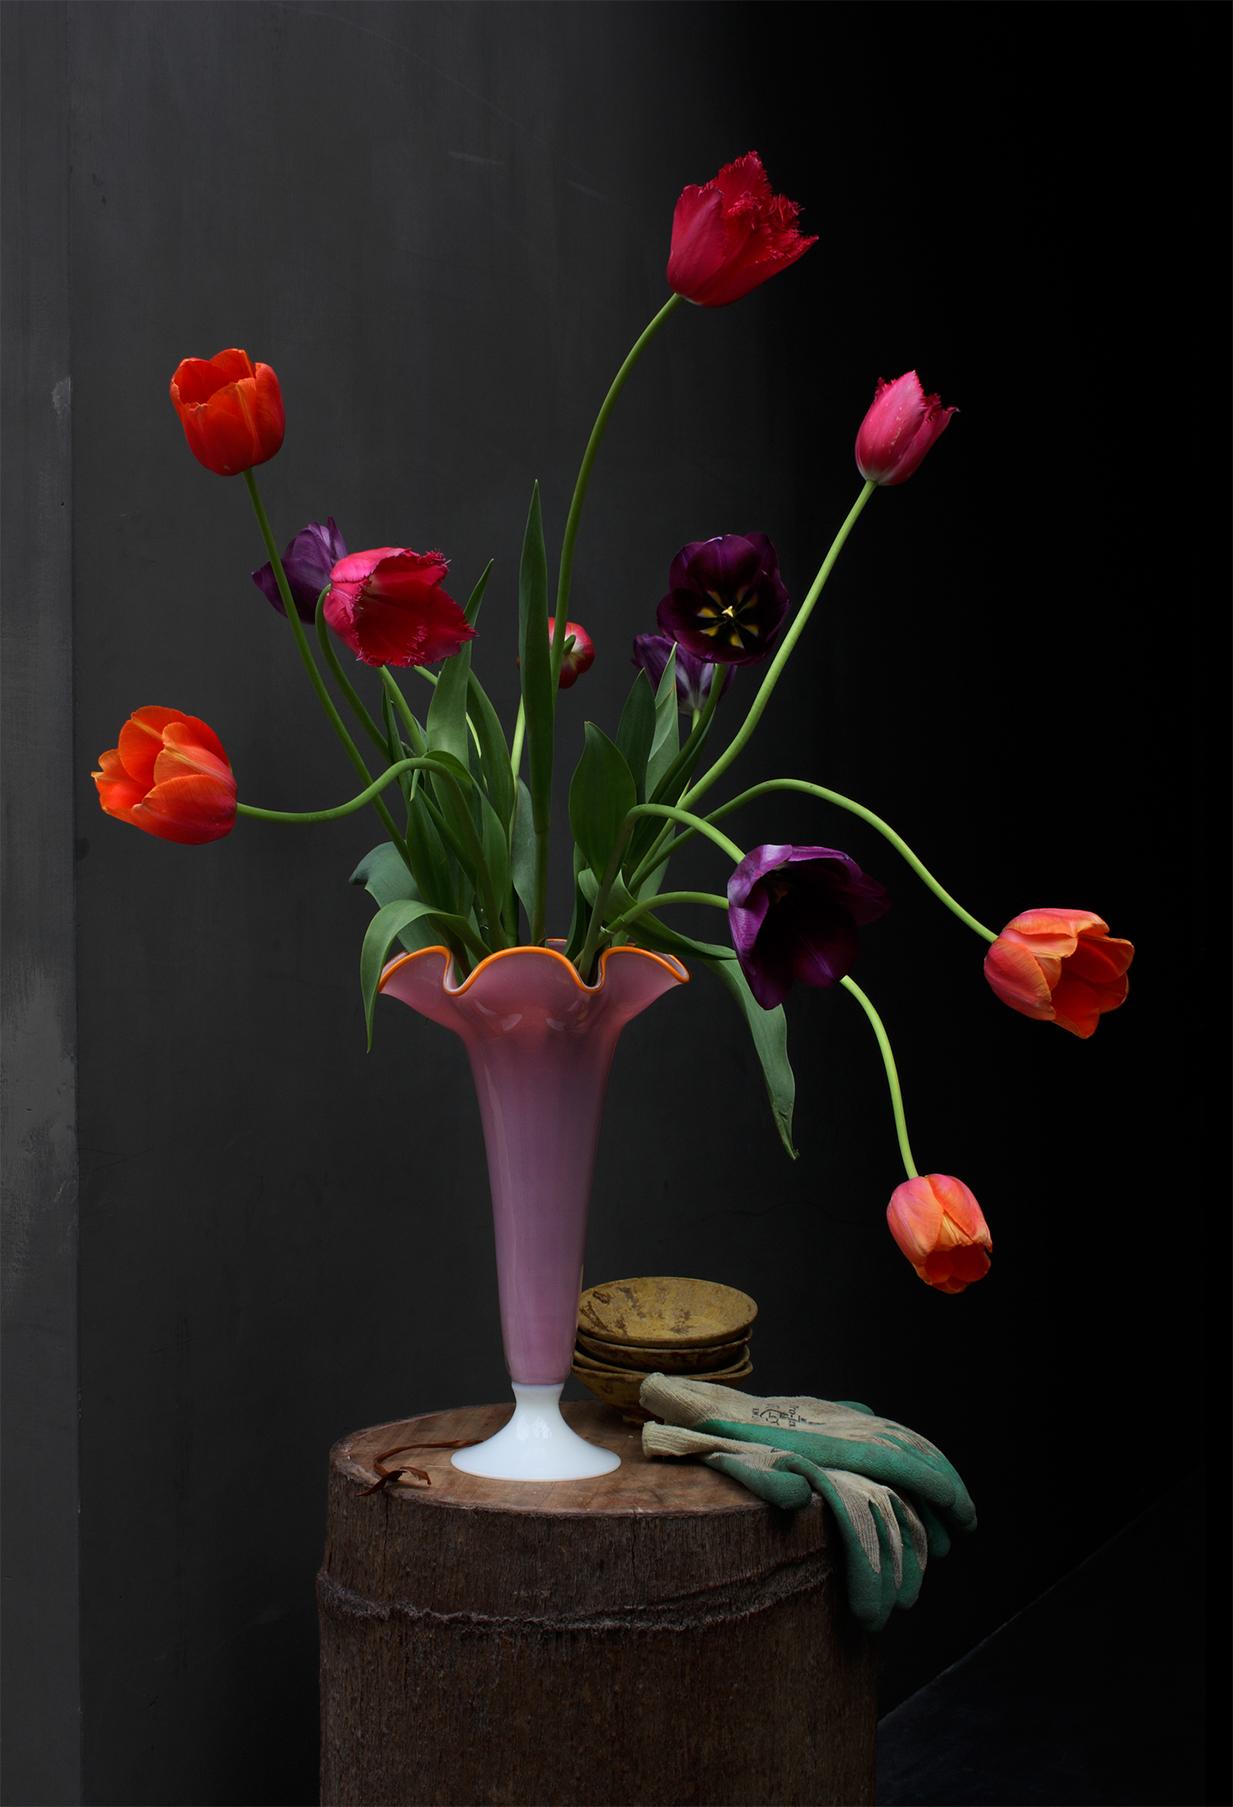 Michael James O’Brien Still-Life Photograph - Still life with Tulips, Garden Gloves and a Fluted Opalina Vase, Antwerp, Photo